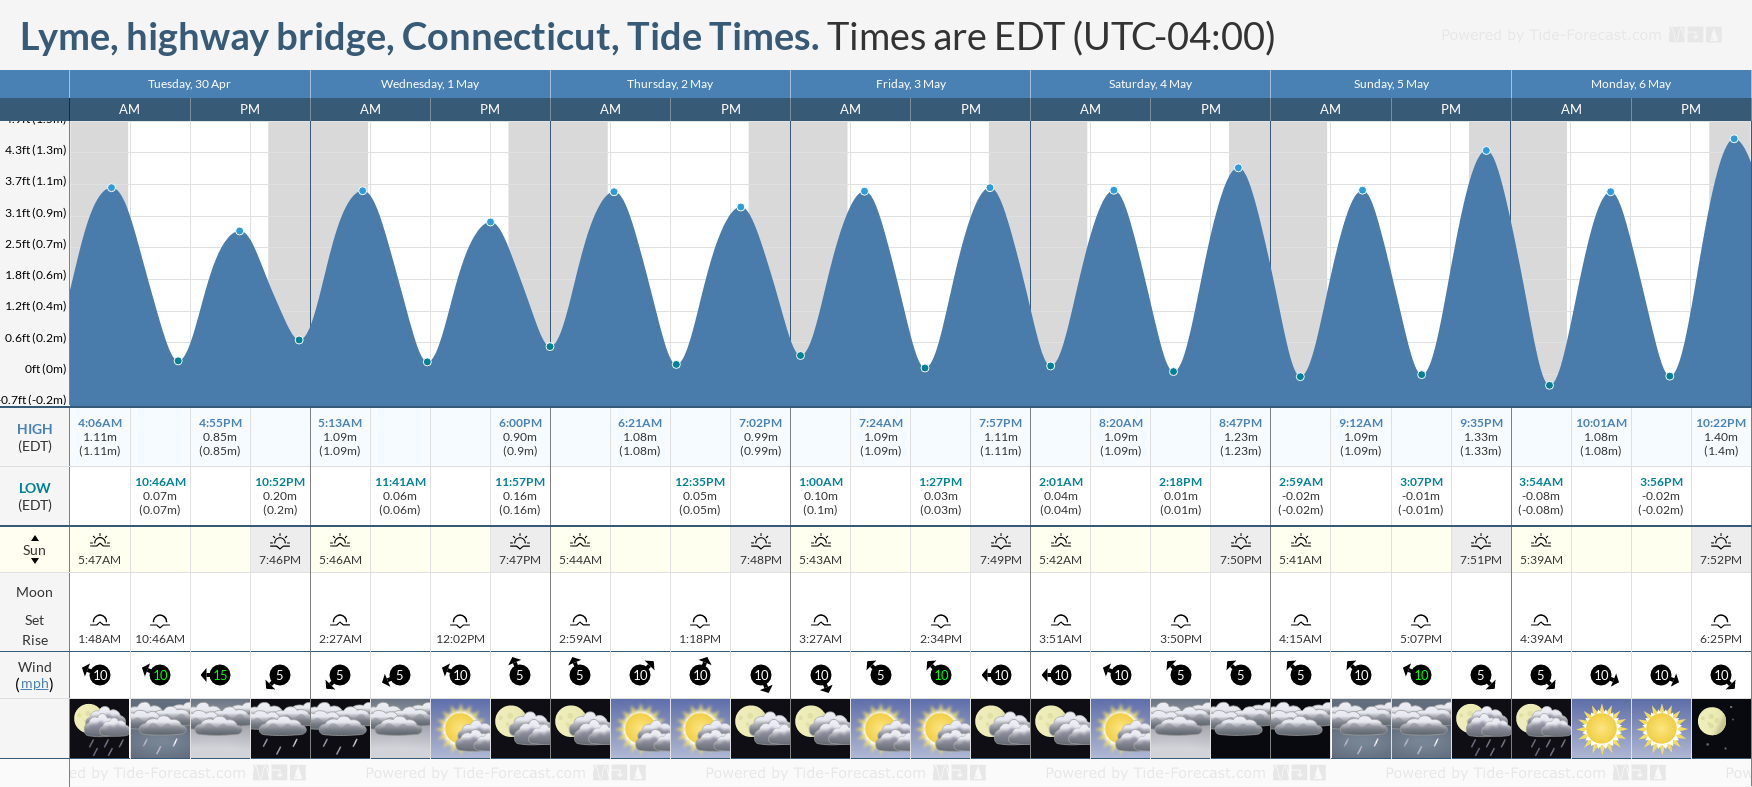 Lyme, highway bridge, Connecticut Tide Chart including high and low tide tide times for the next 7 days